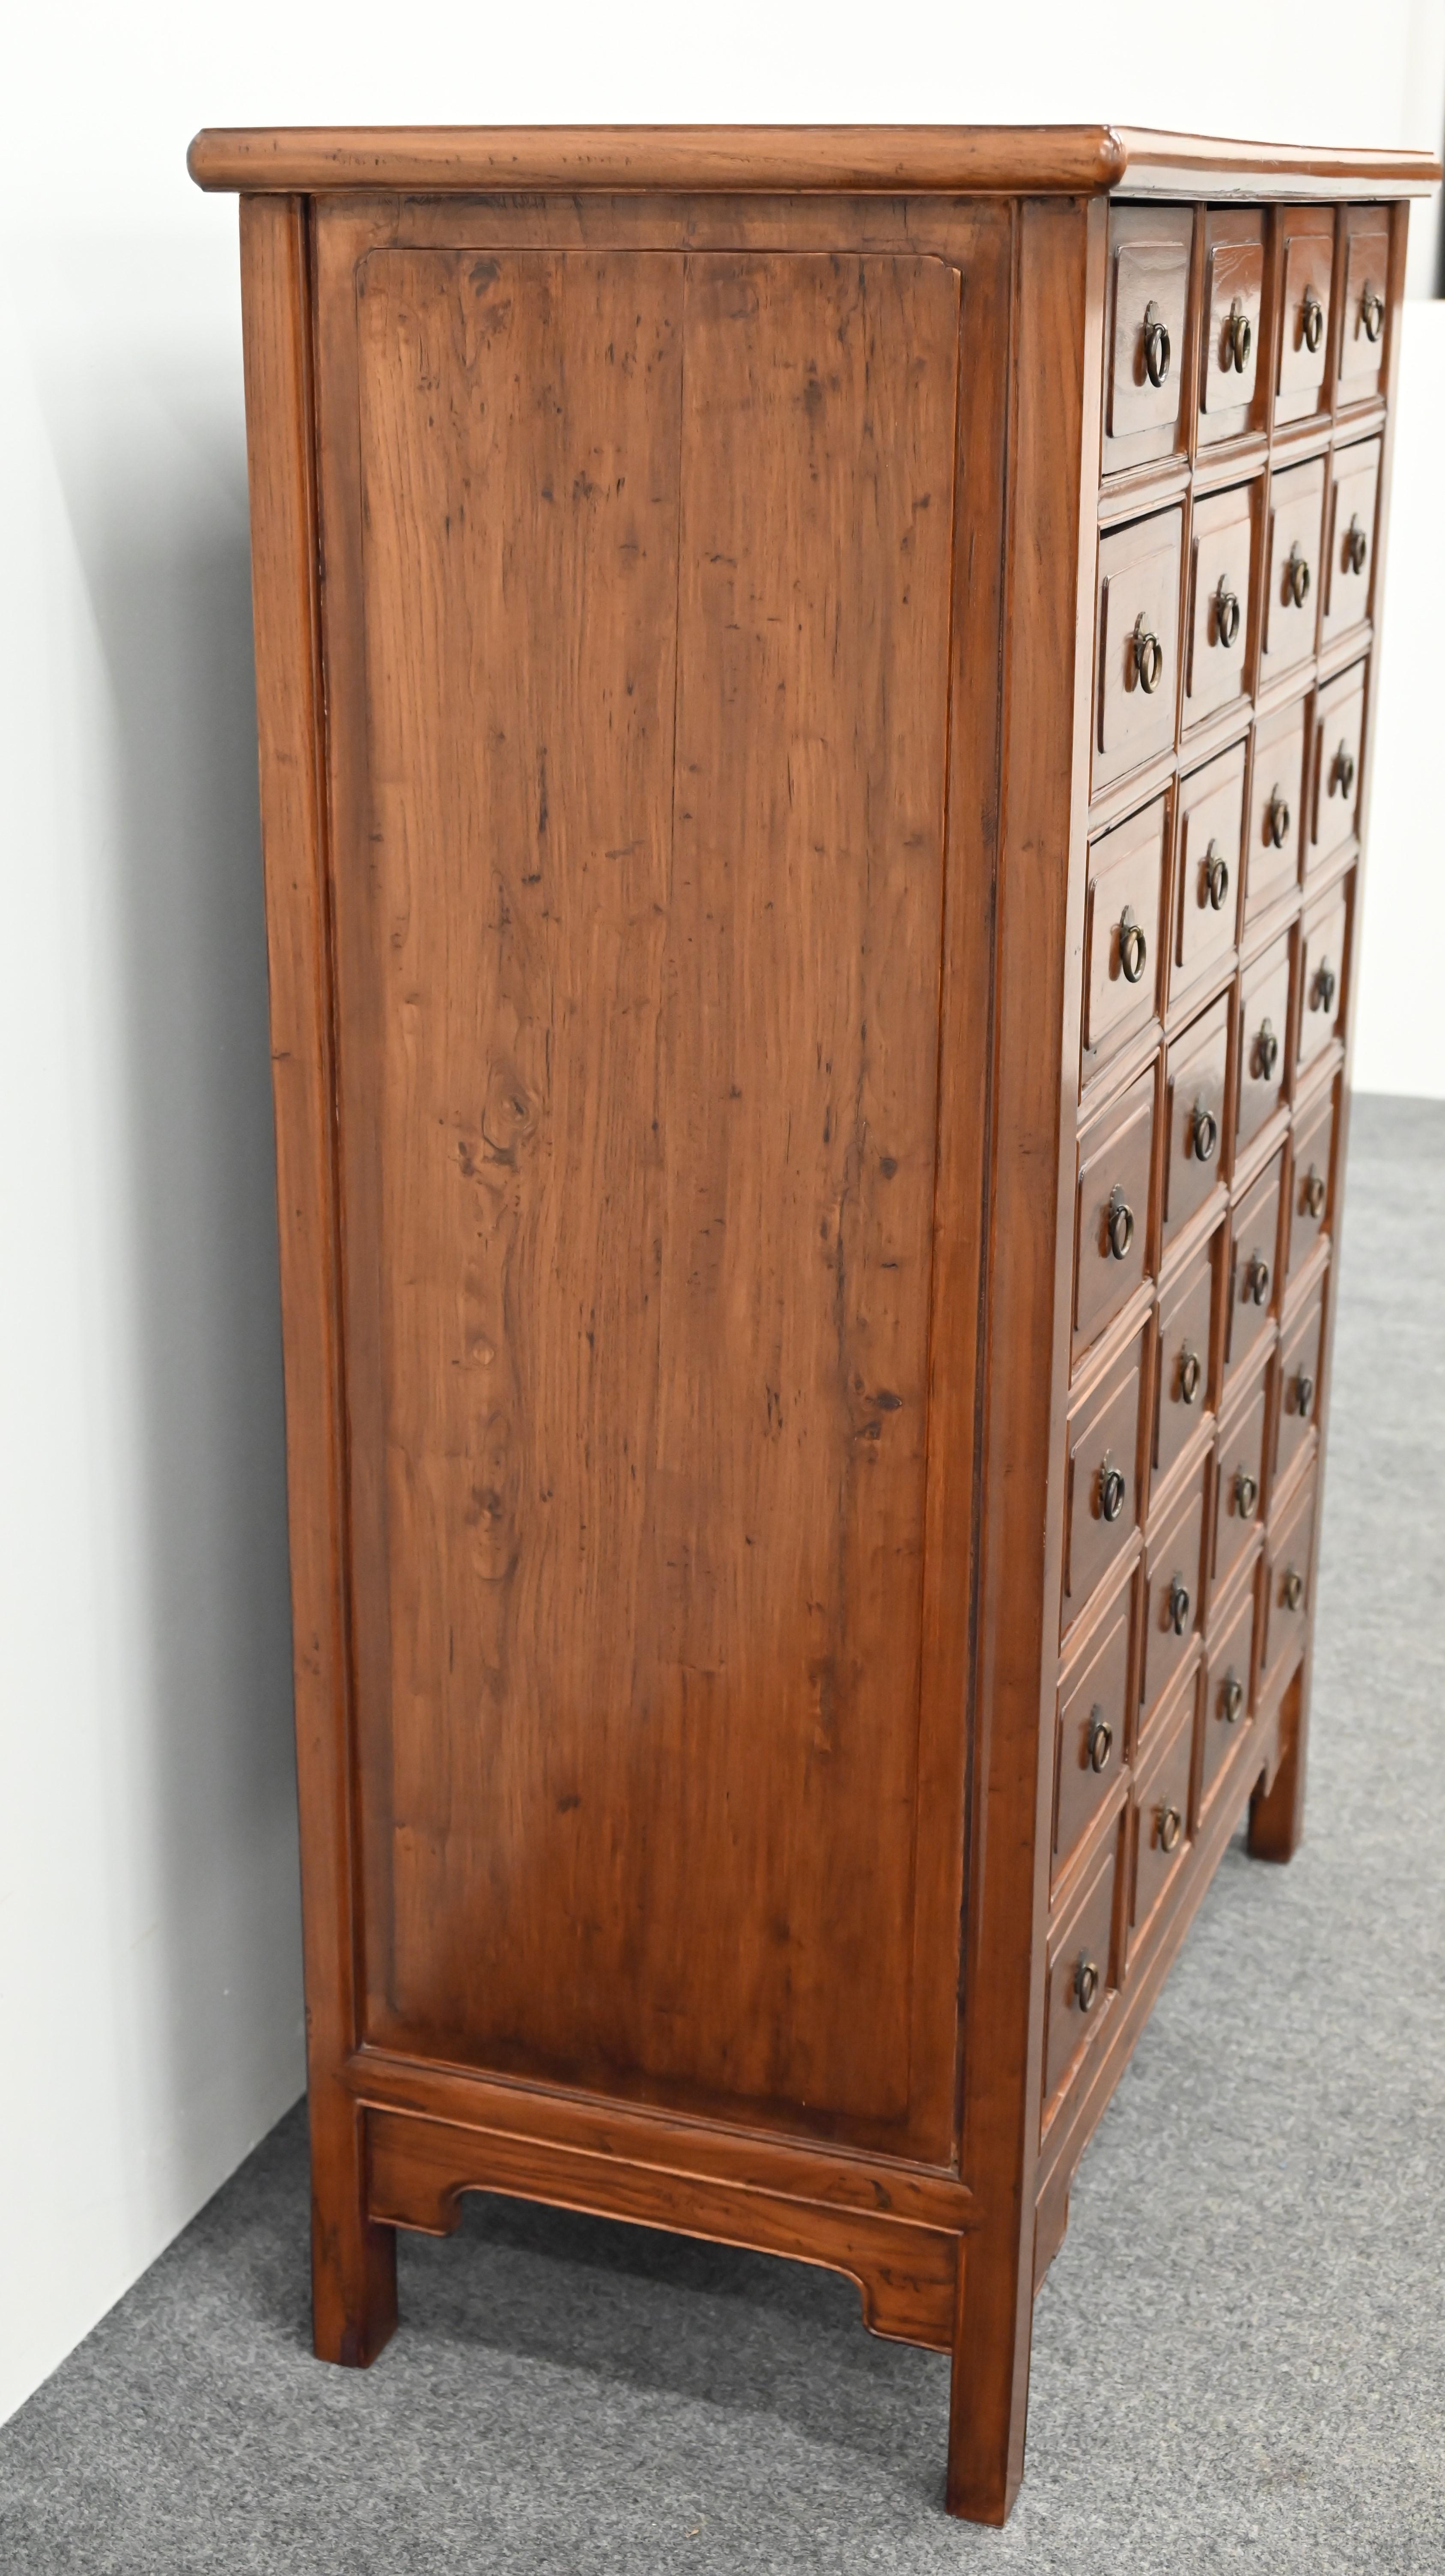 Chinese Apothecary Cabinet with 28 Drawers in Elmwood, 20th Century For Sale 4